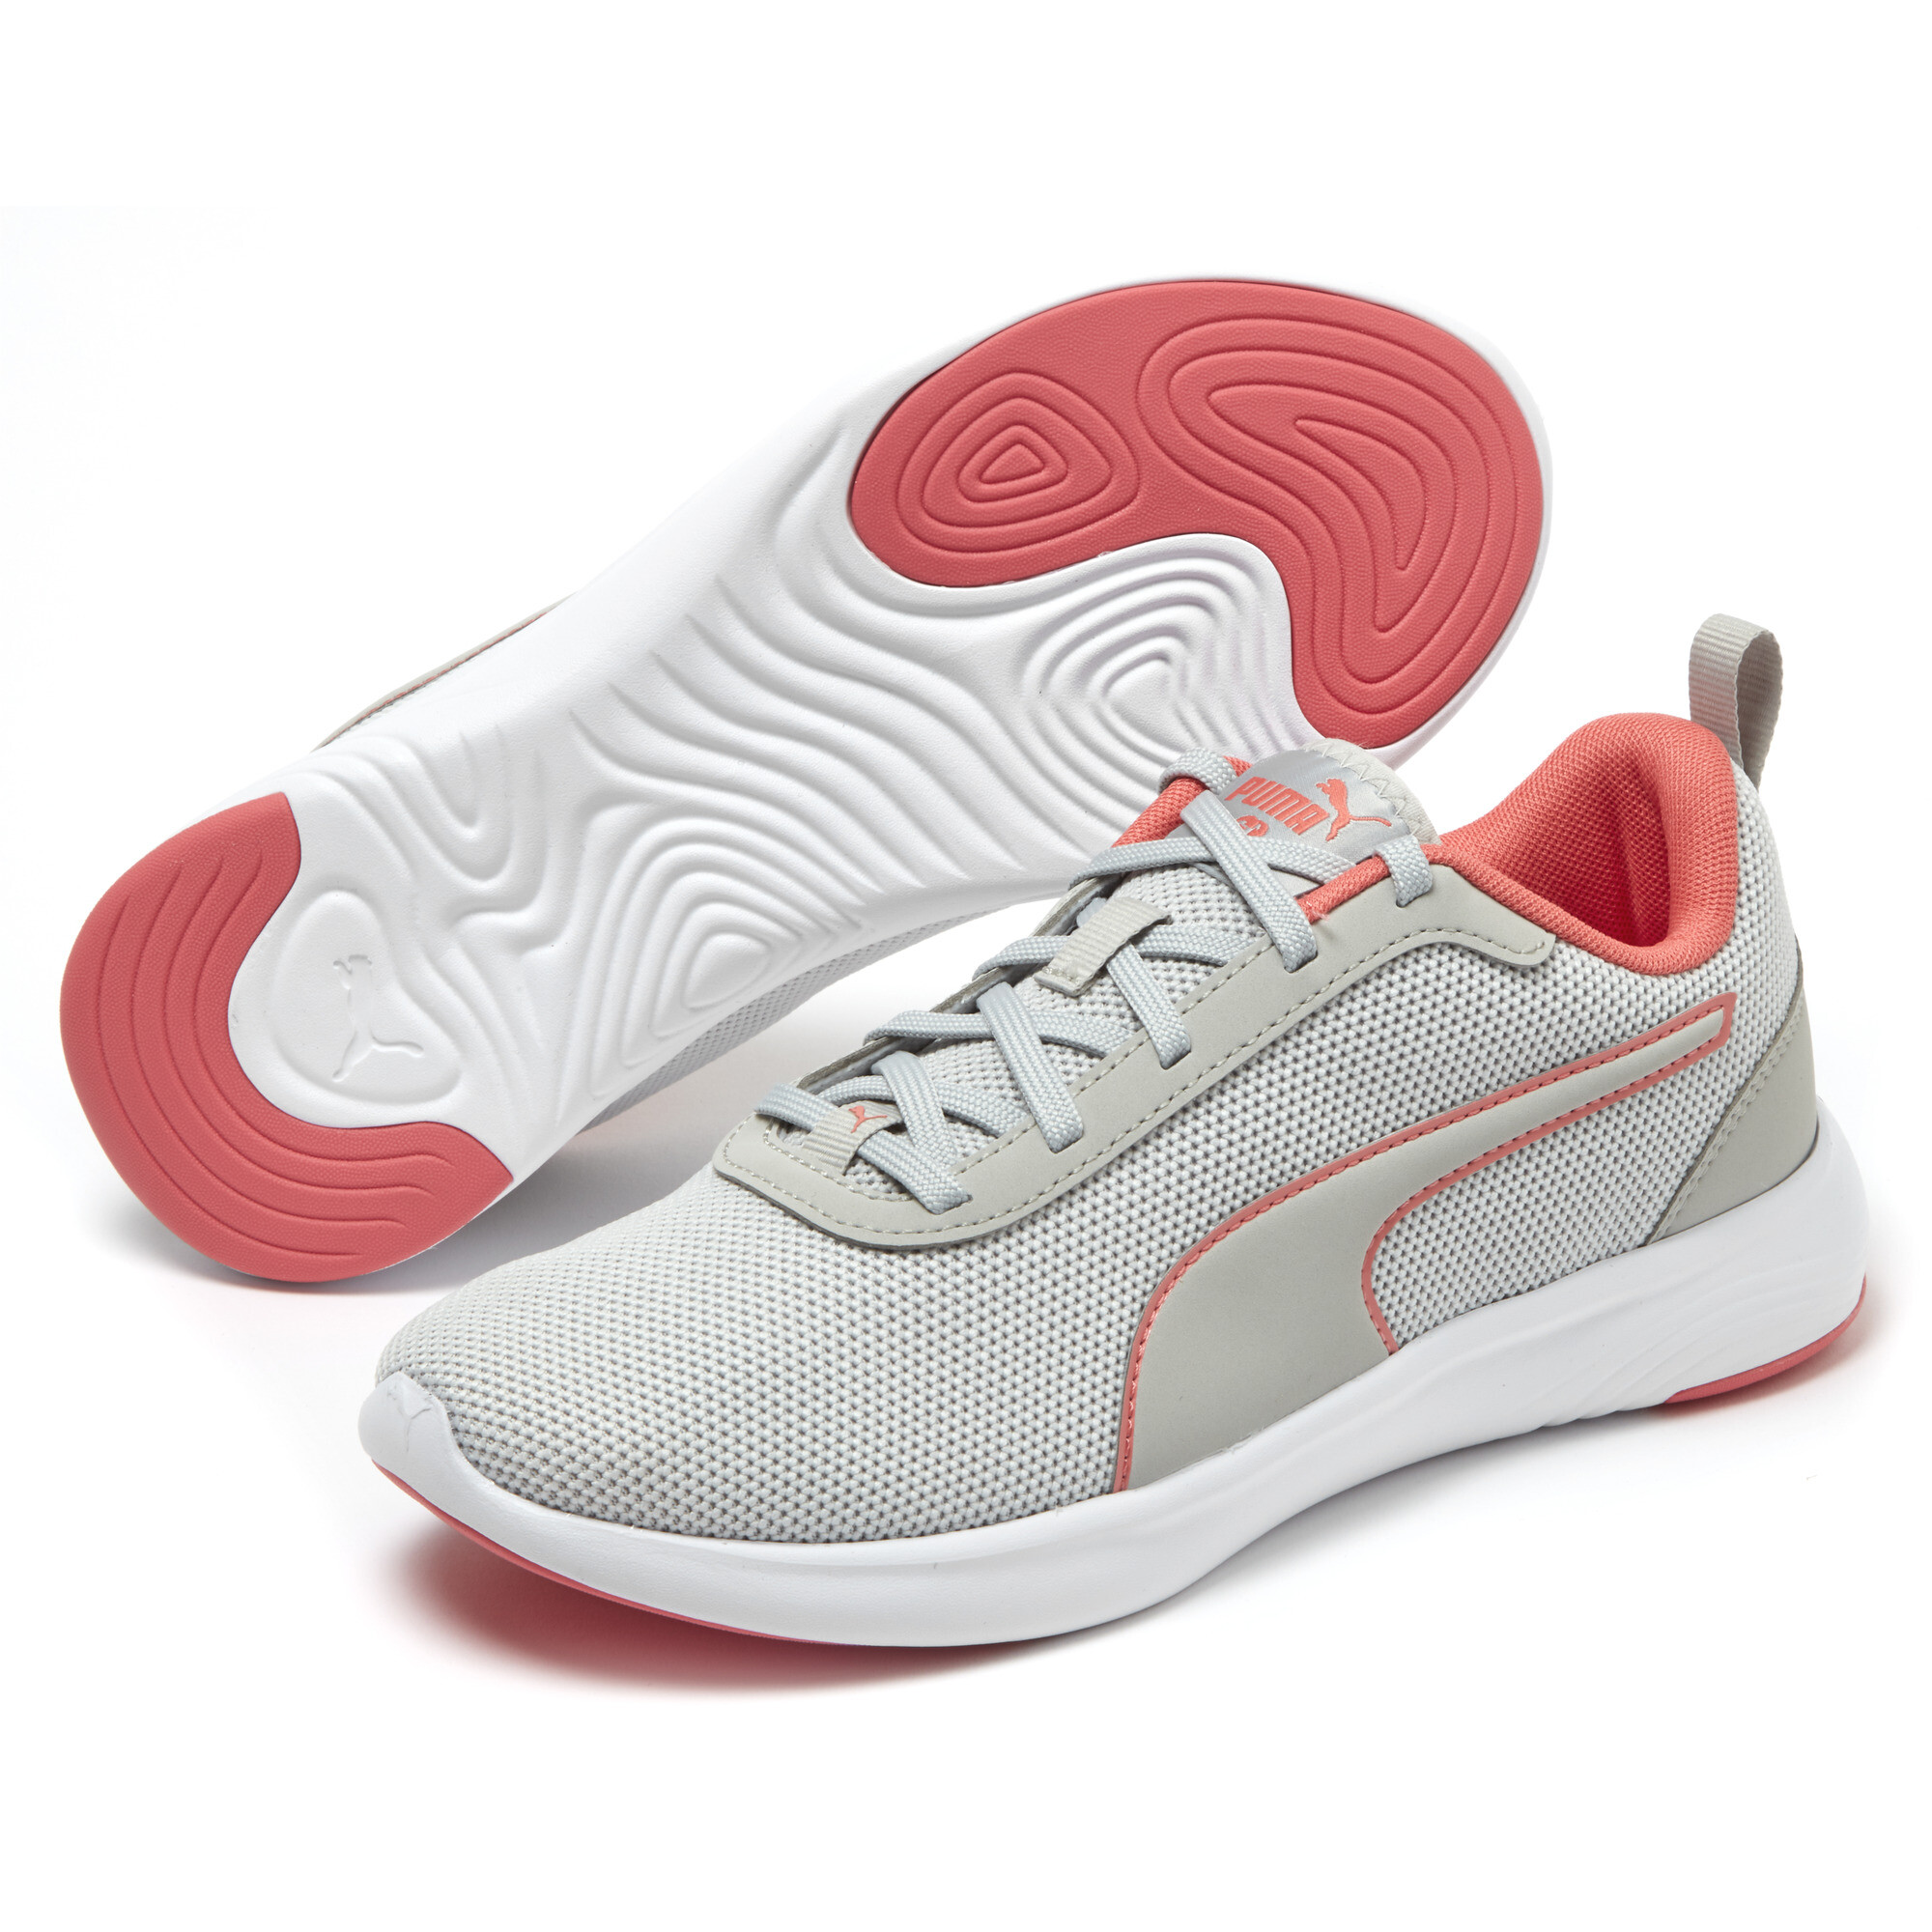 PUMA SOFTRIDE Vital Fresh Better Running Shoes Trainers Lace Up Low Top  Womens eBay